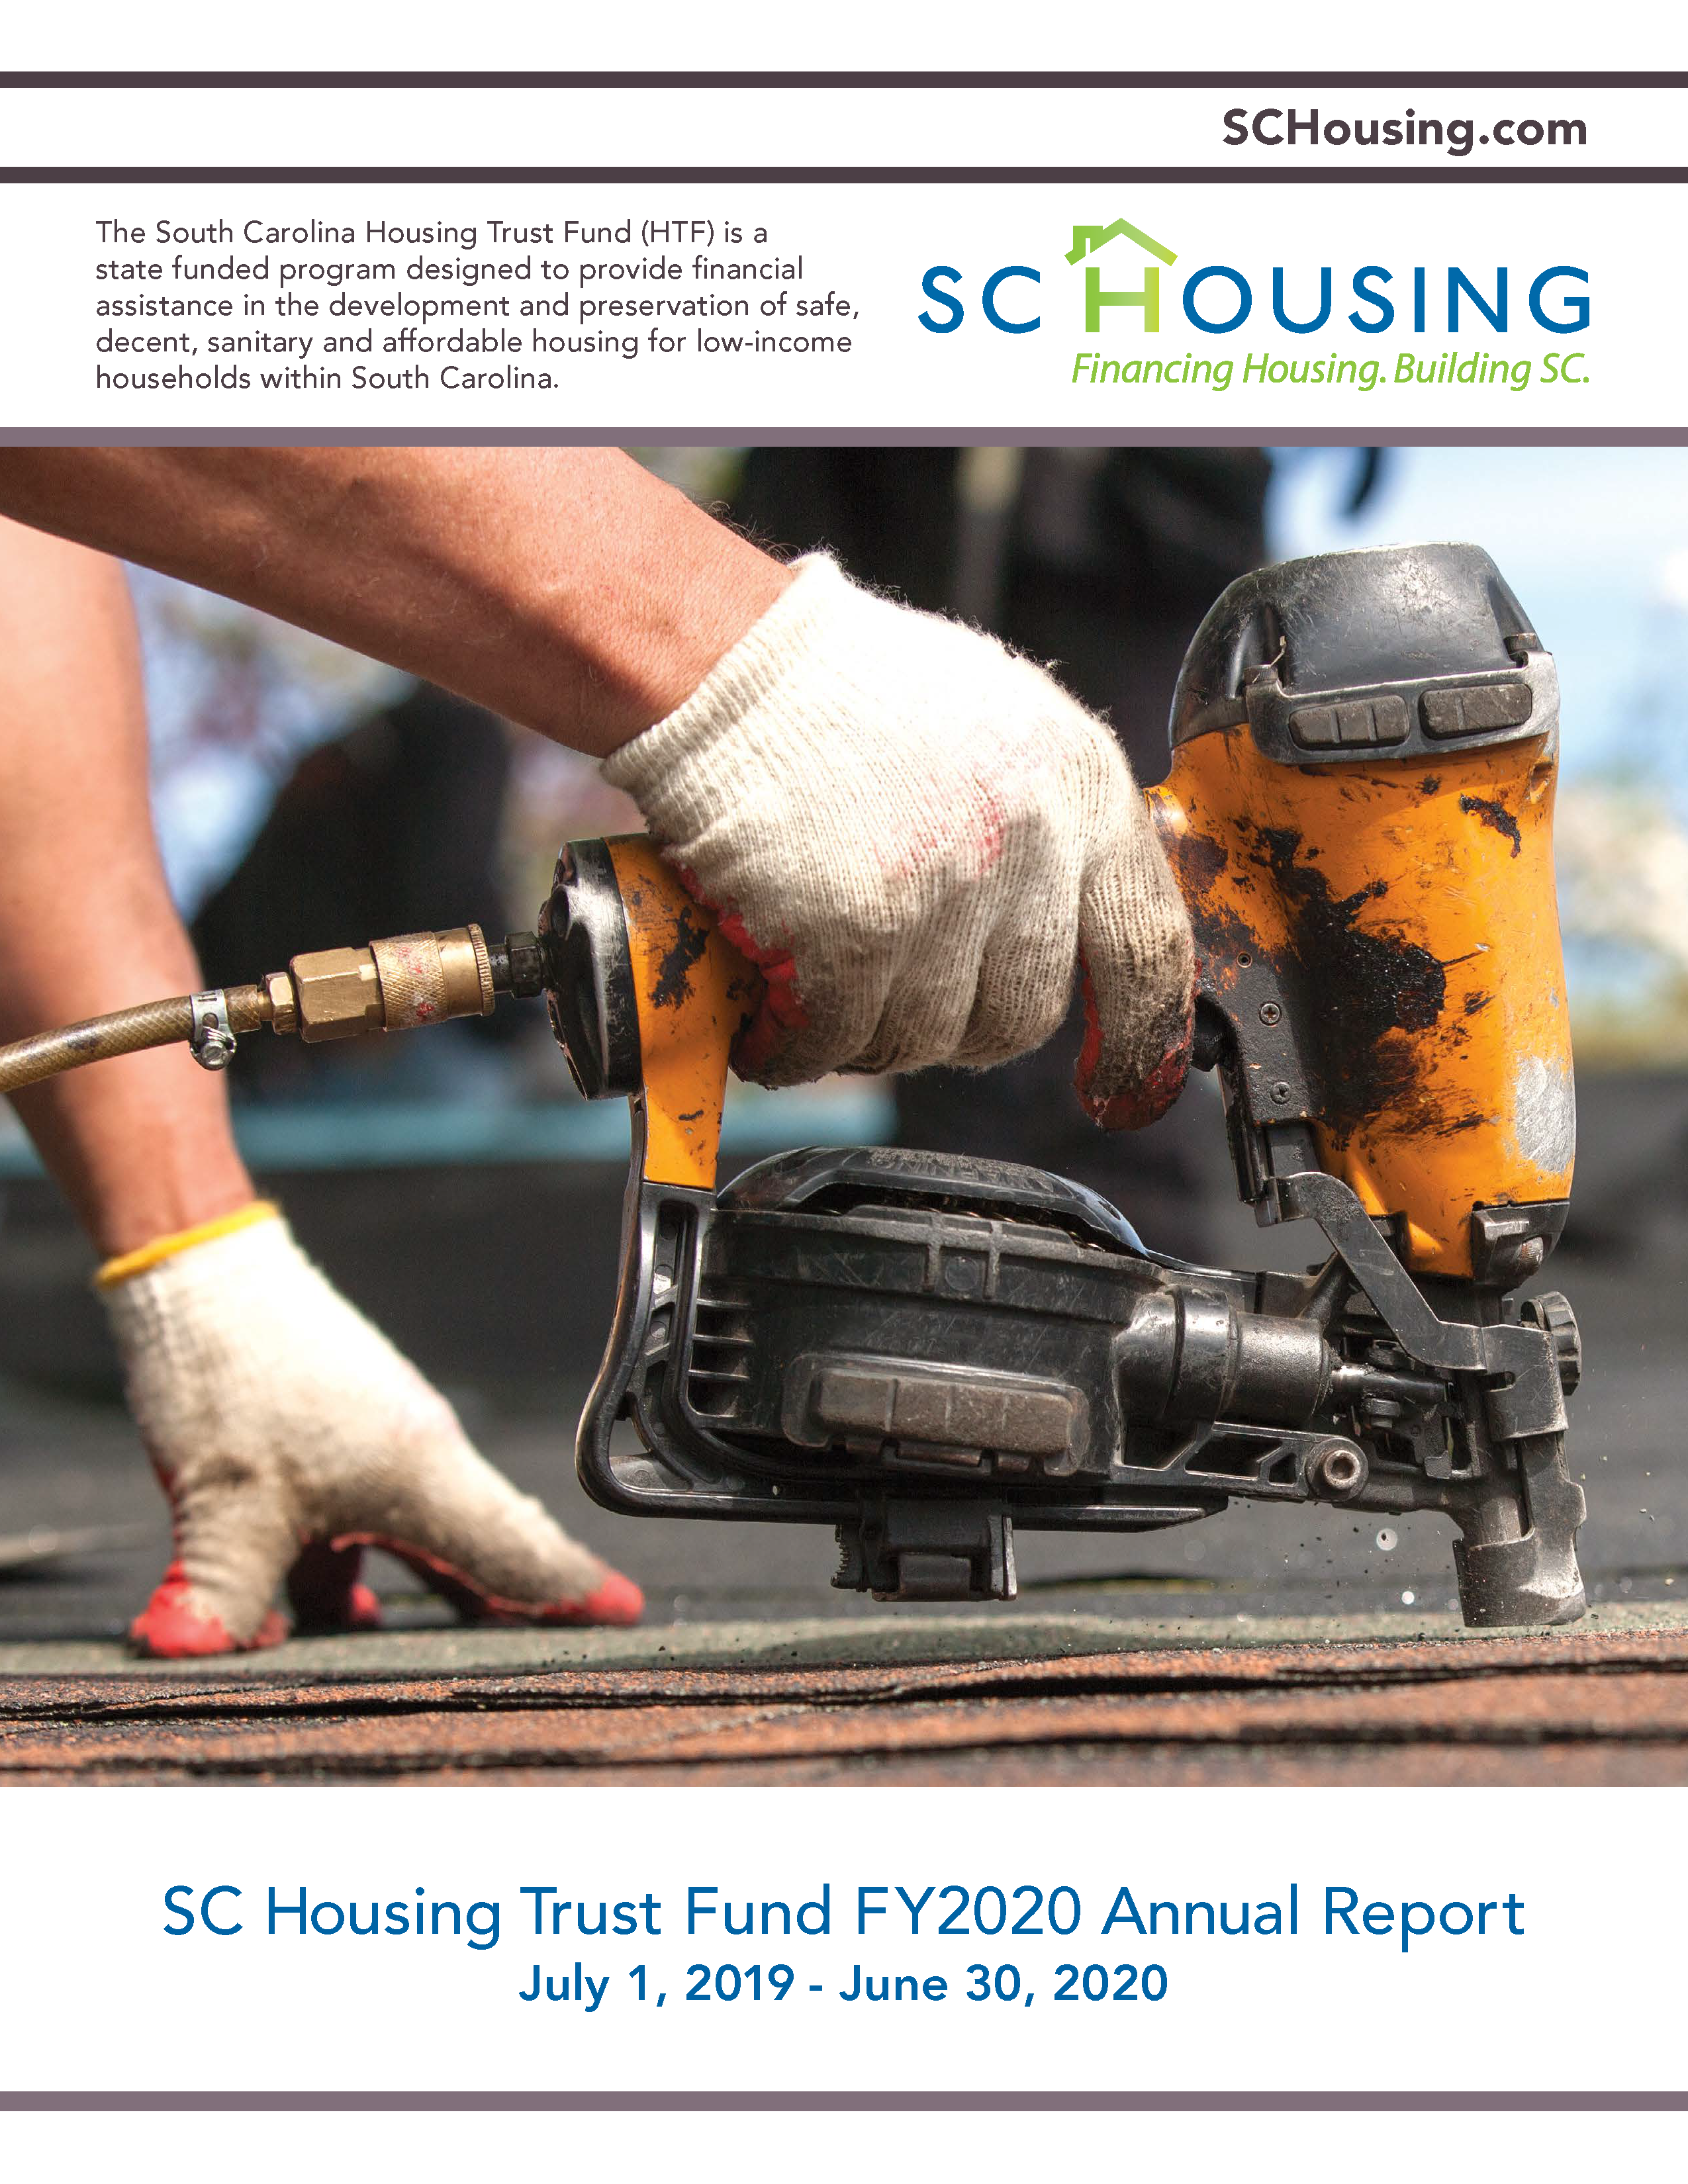 Housing Trust Fund Report for Fiscal Year 2020